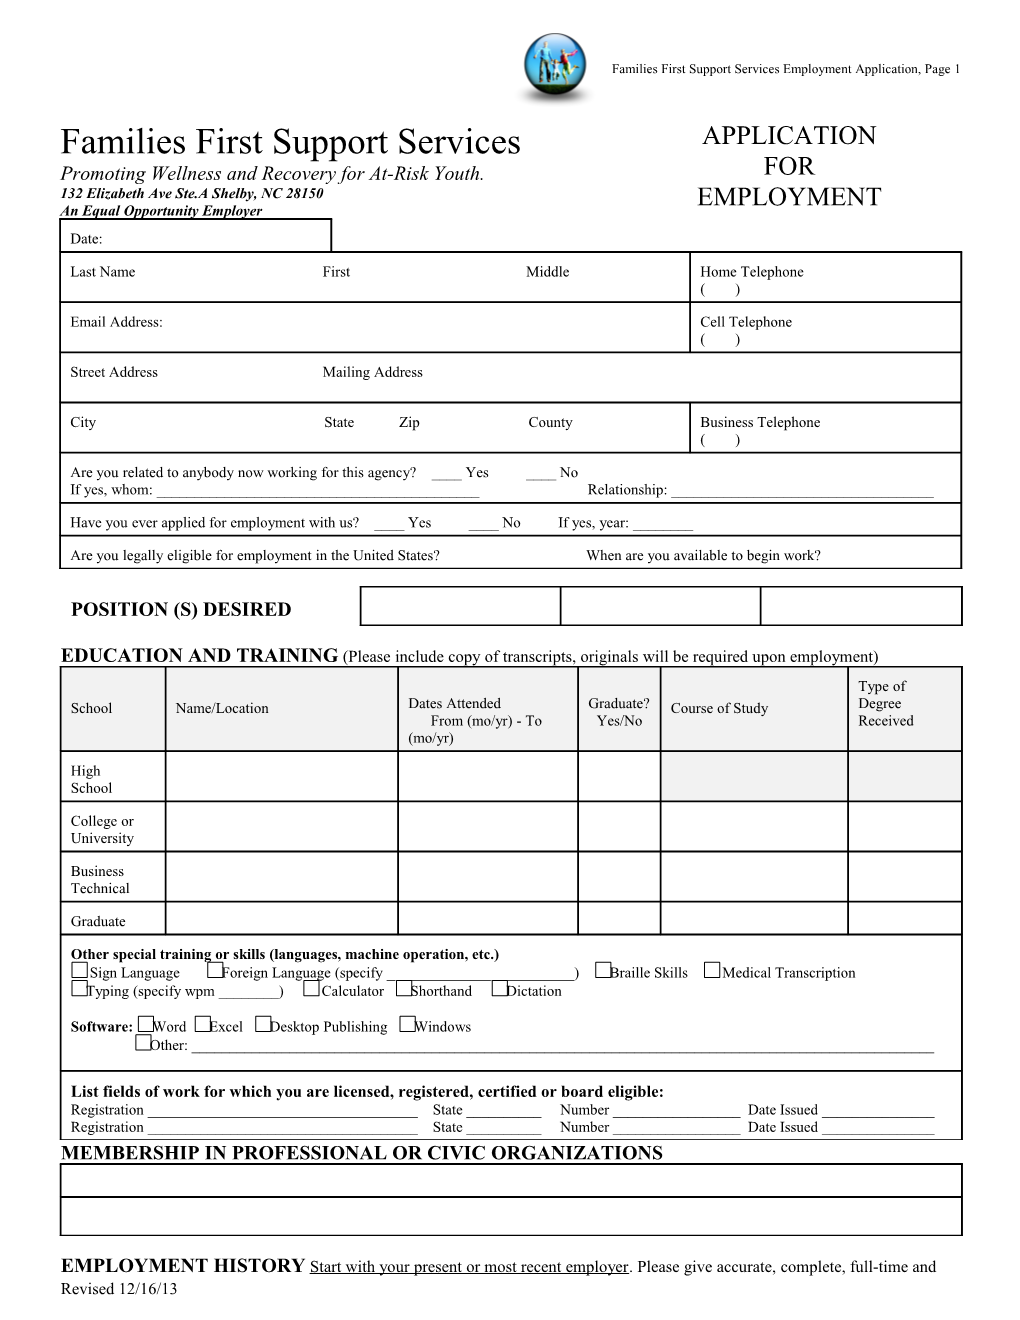 Application for Employment s22